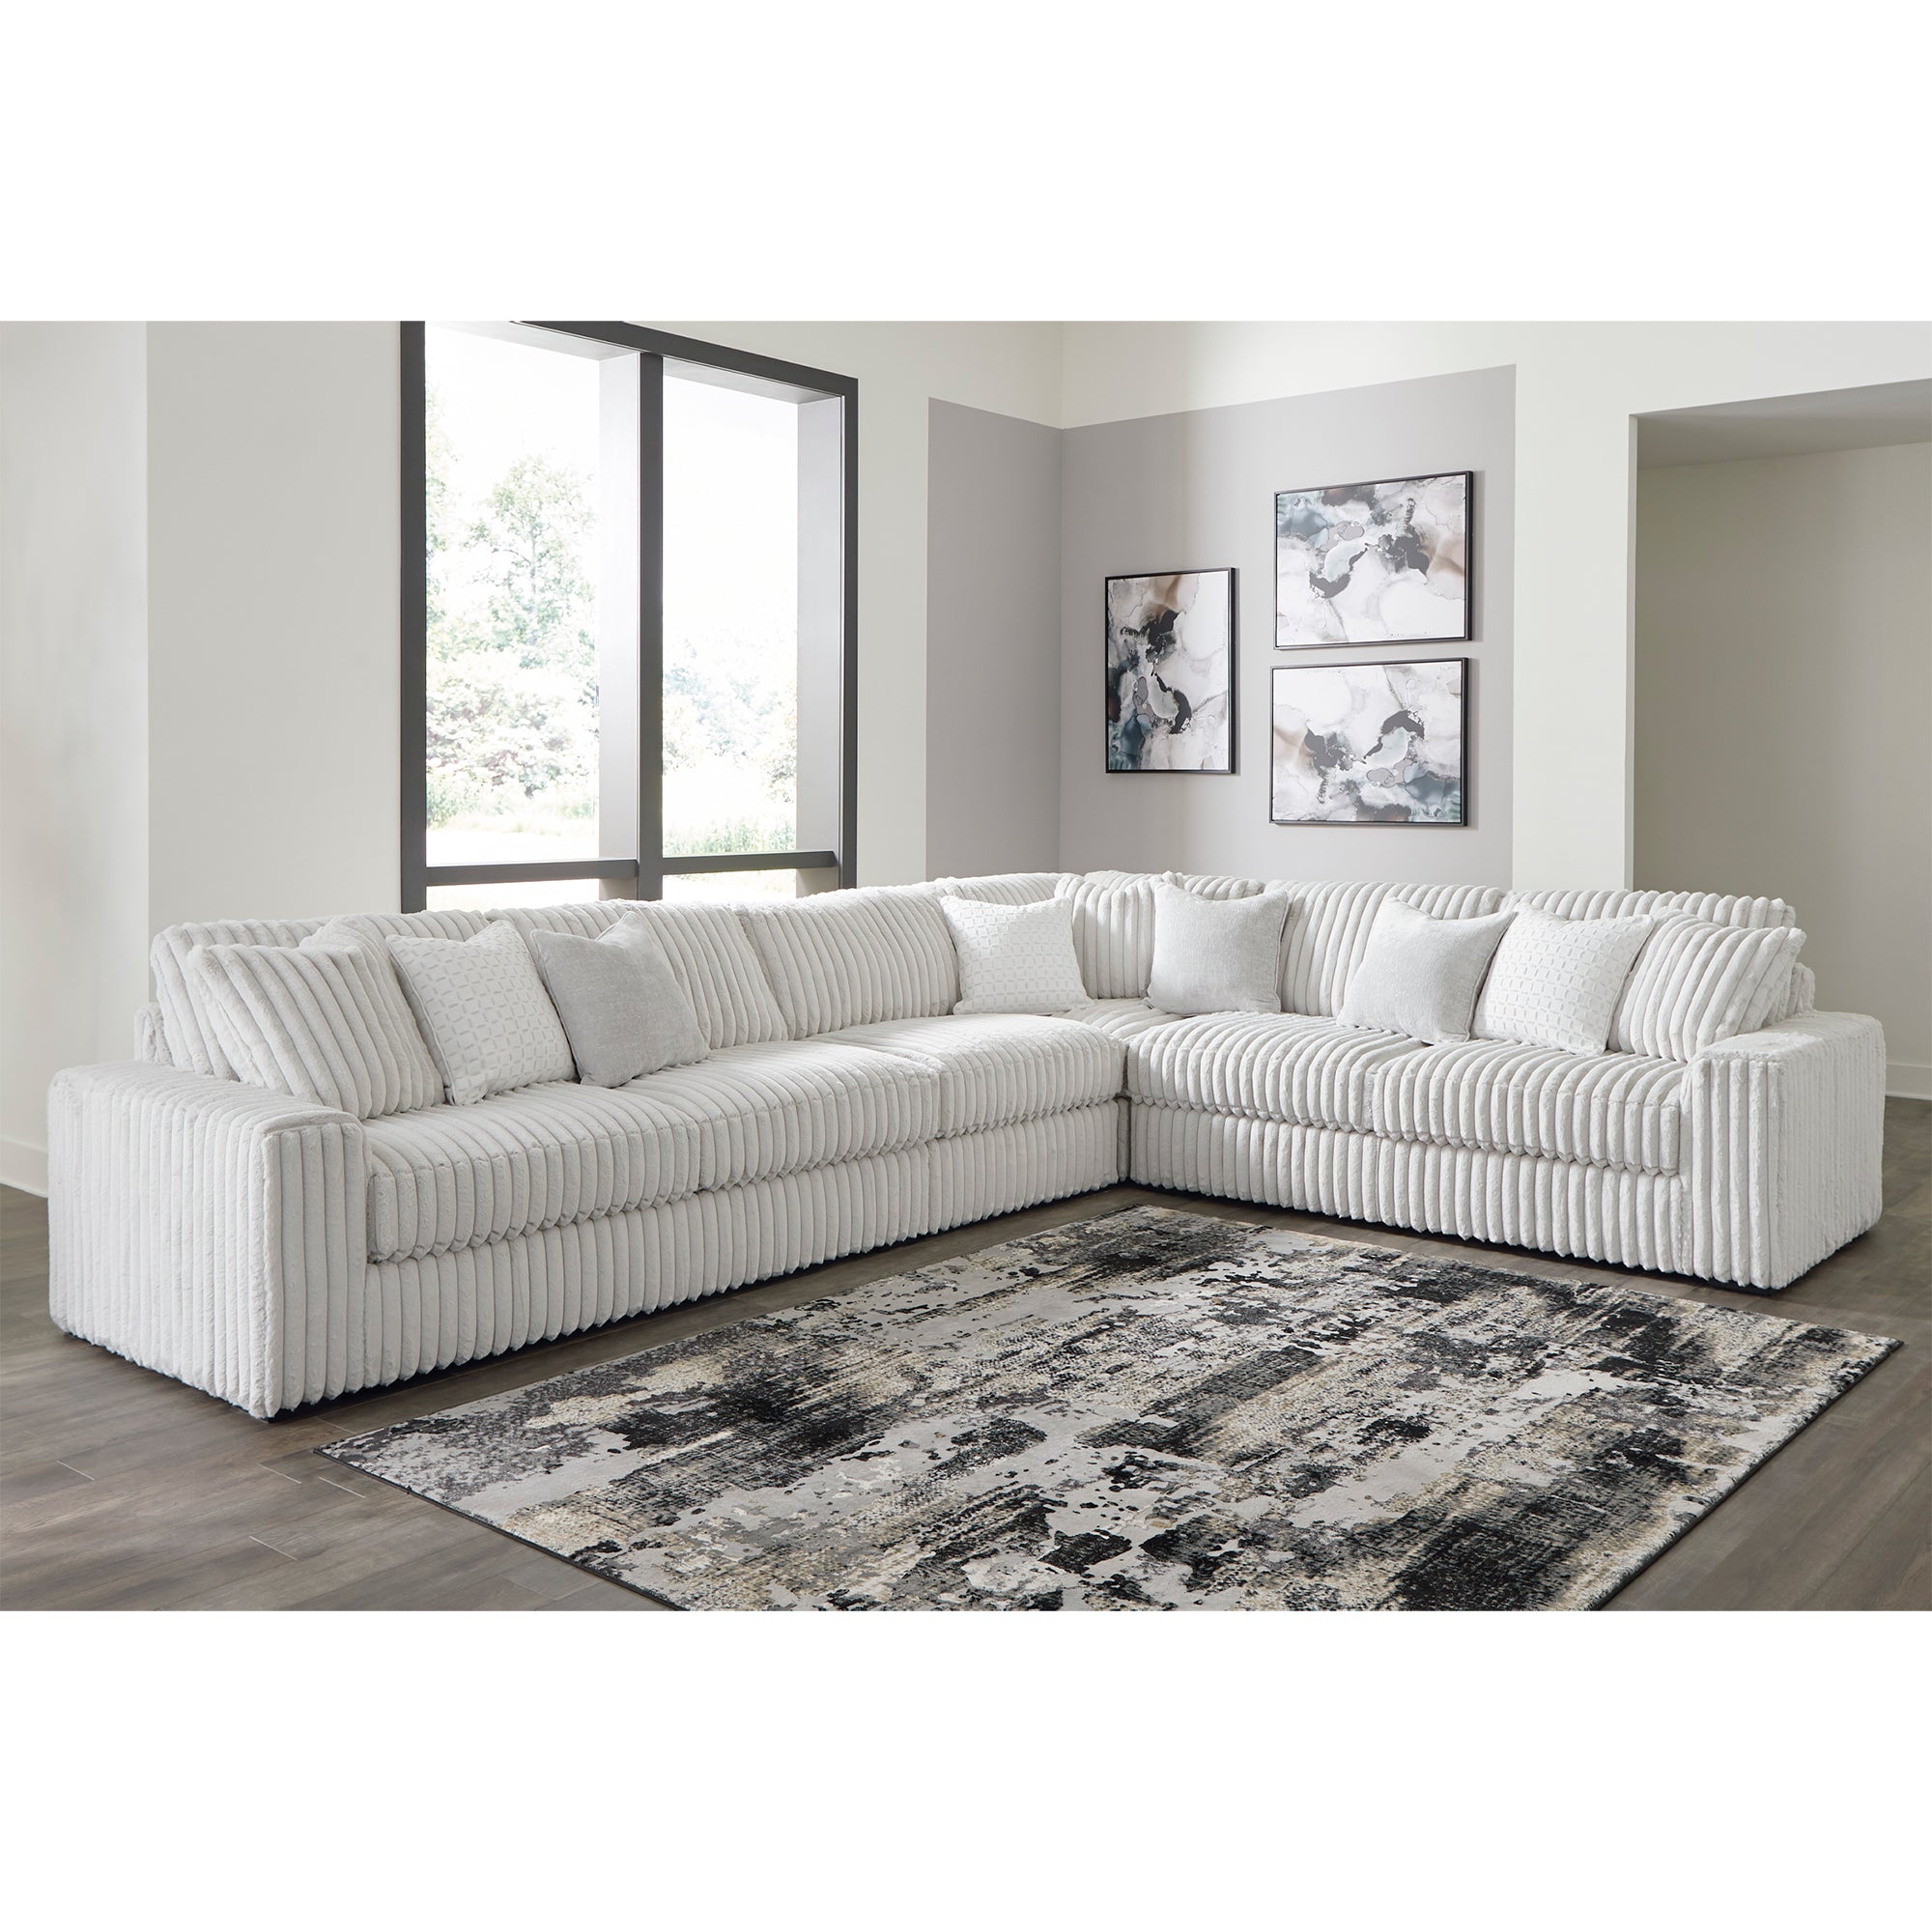 Elegant Stupendous 4-Piece Sectional with plush polyester upholstery and faux wood finish feet for modern interiors